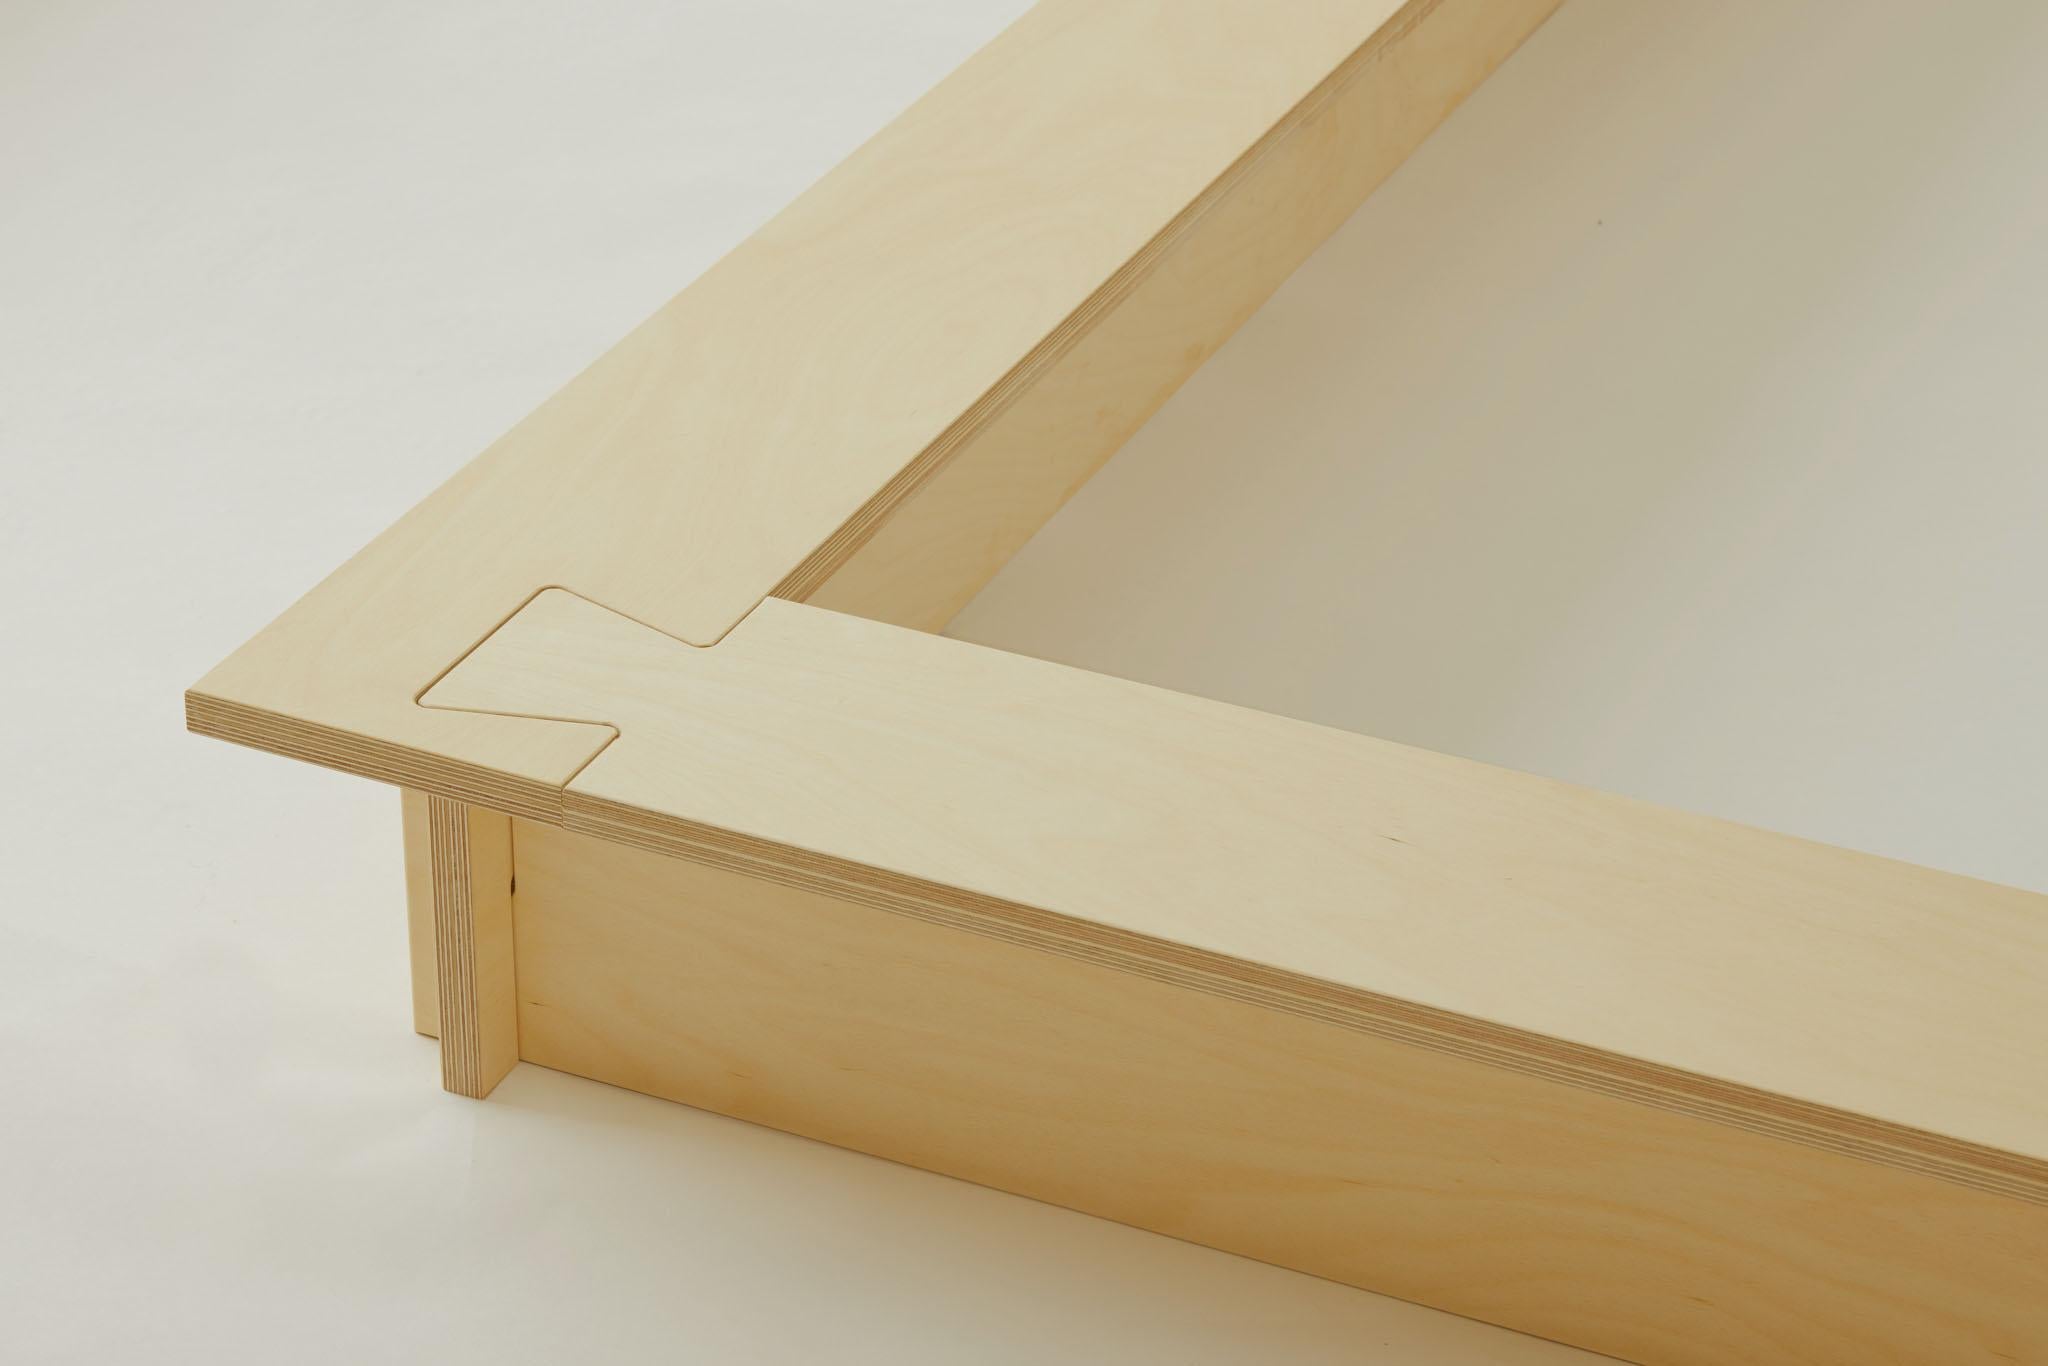 American Minimalist Birch Dovetail Bed, Judd Style - by The Future is Flat For Sale